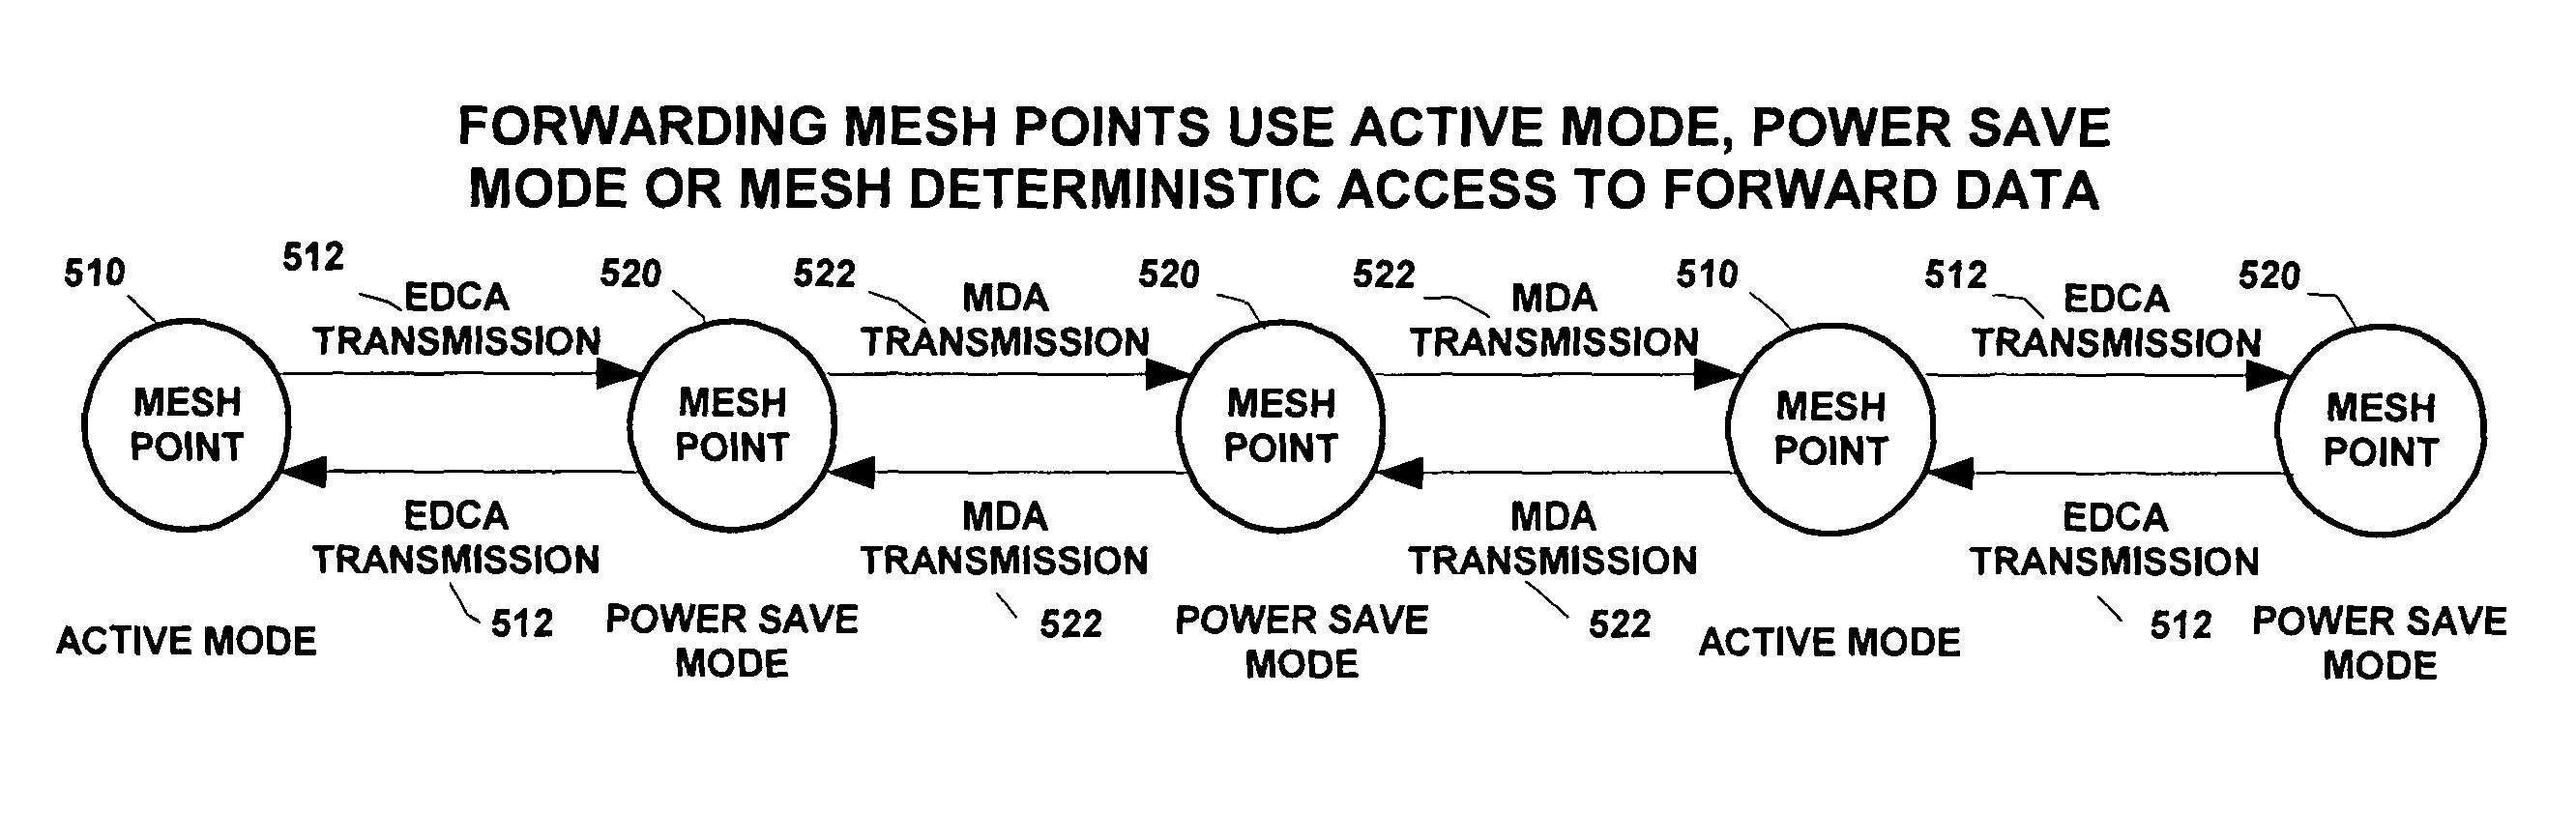 Quality of service and power aware forwarding rules for mesh points in wireless mesh networks